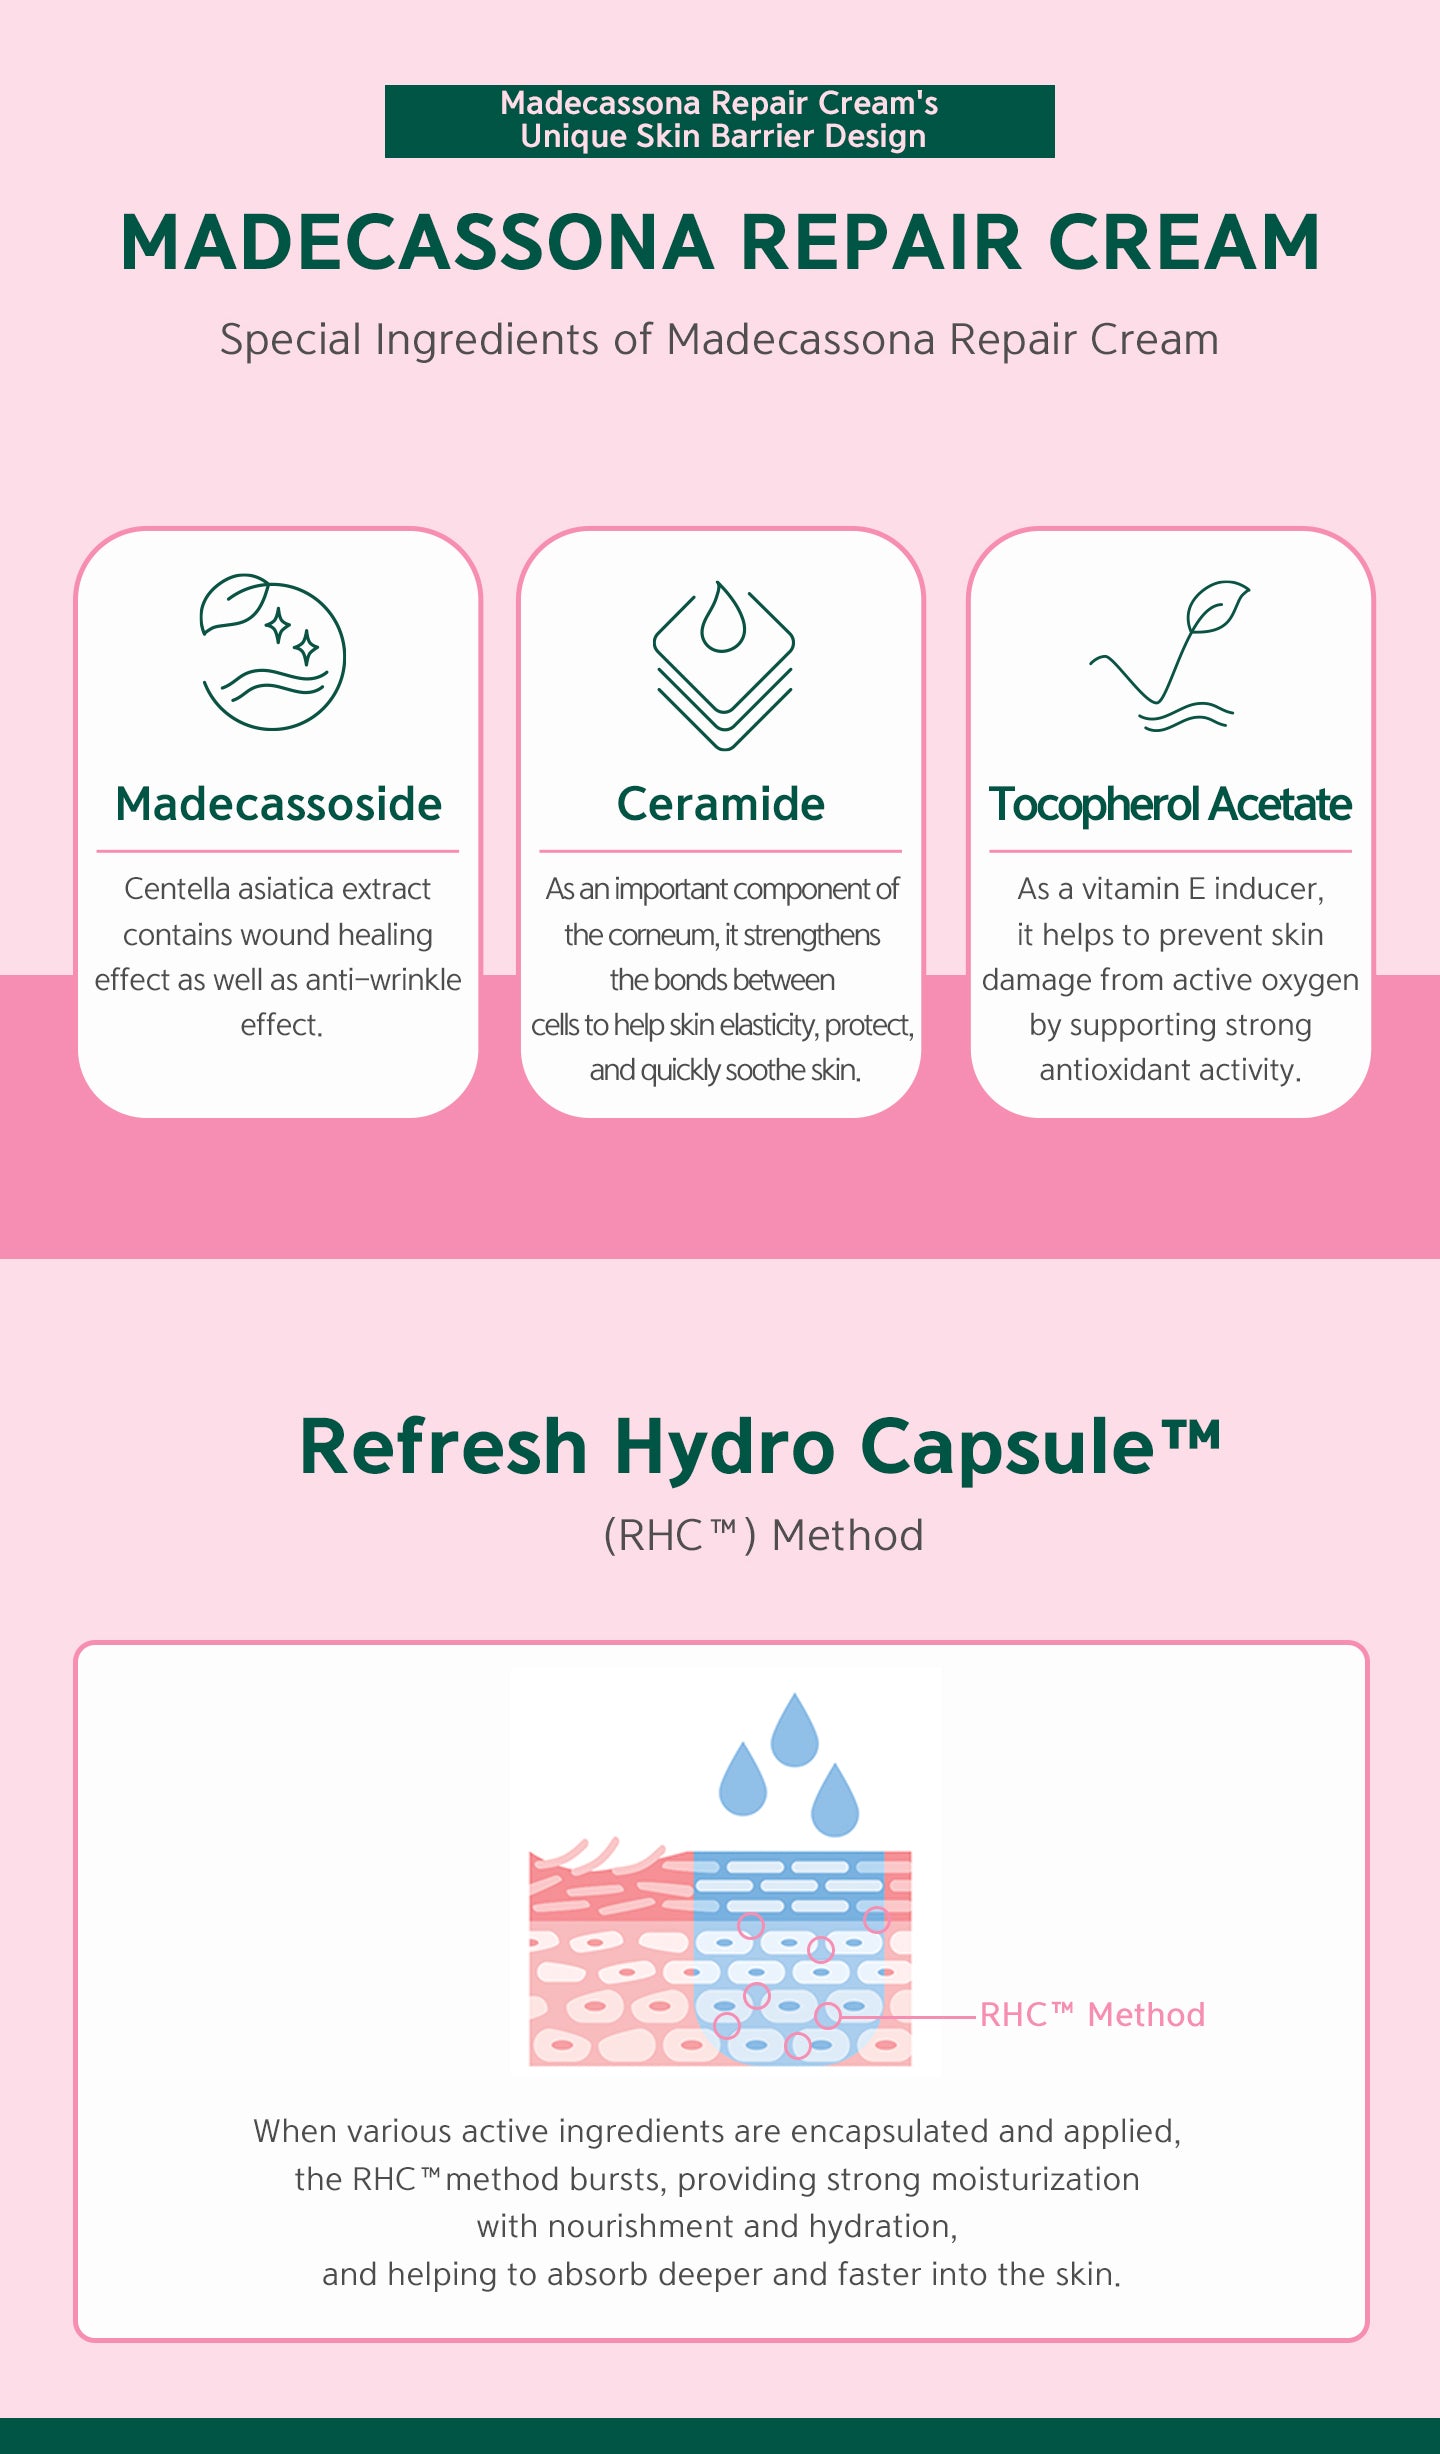 Centalla asiatica extract, ceramide, tocopherol acetate. Refresh hydro capsule: when various active ingredients are encapsulated and applied, the RHC method bursts, providing strong moisturization with nourishment and hydration, and helping to absorb deep